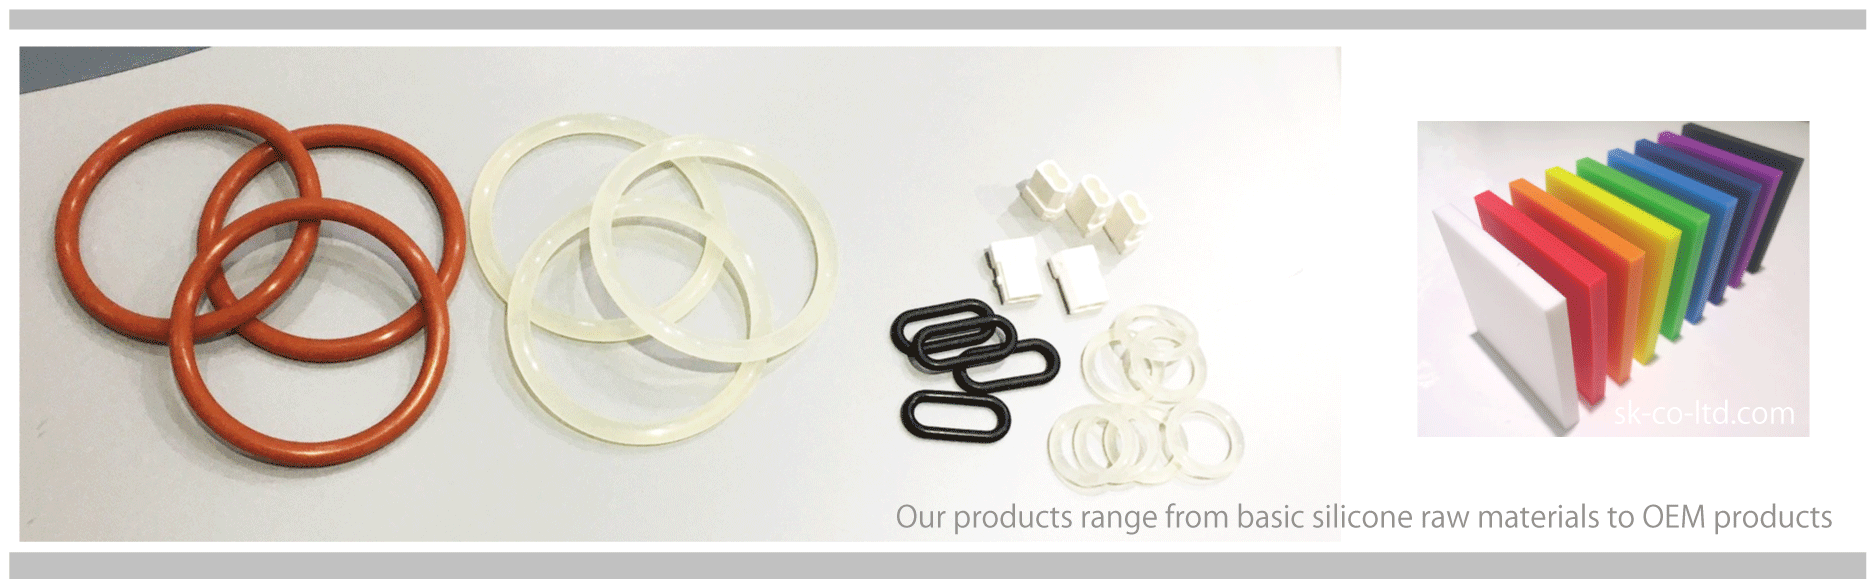 Our products range from basic silicone raw materials to OEM products